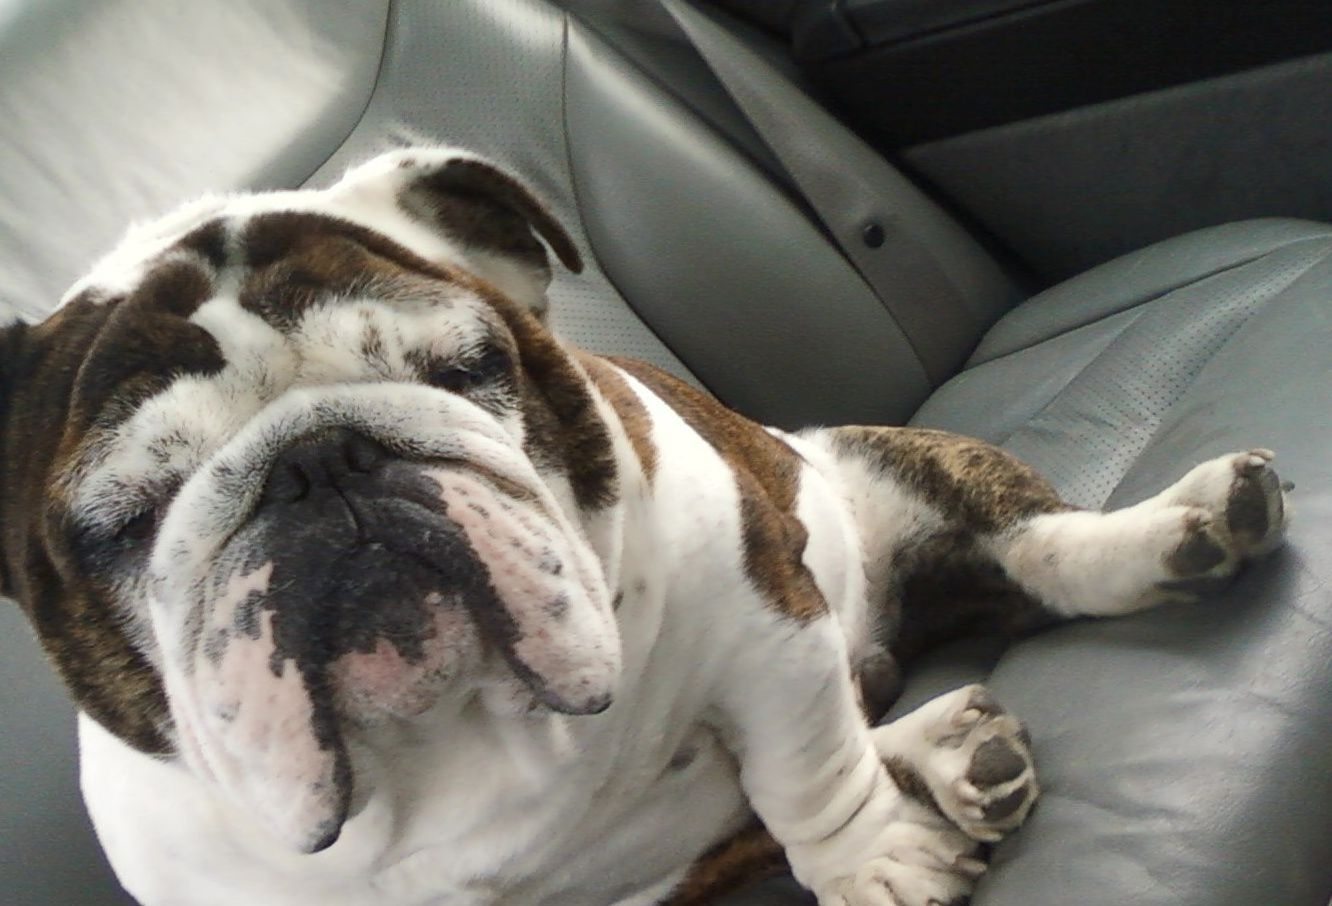 Cowlitz County Sheriff's Office deputies on Tuesday arrested two individuals in connection with a theft and extortion case involving a Woodland woman's English bulldog, Jaggar. The dog was reported missing on Oct. 4. Jaggar was found dead in Kelso on Oct.